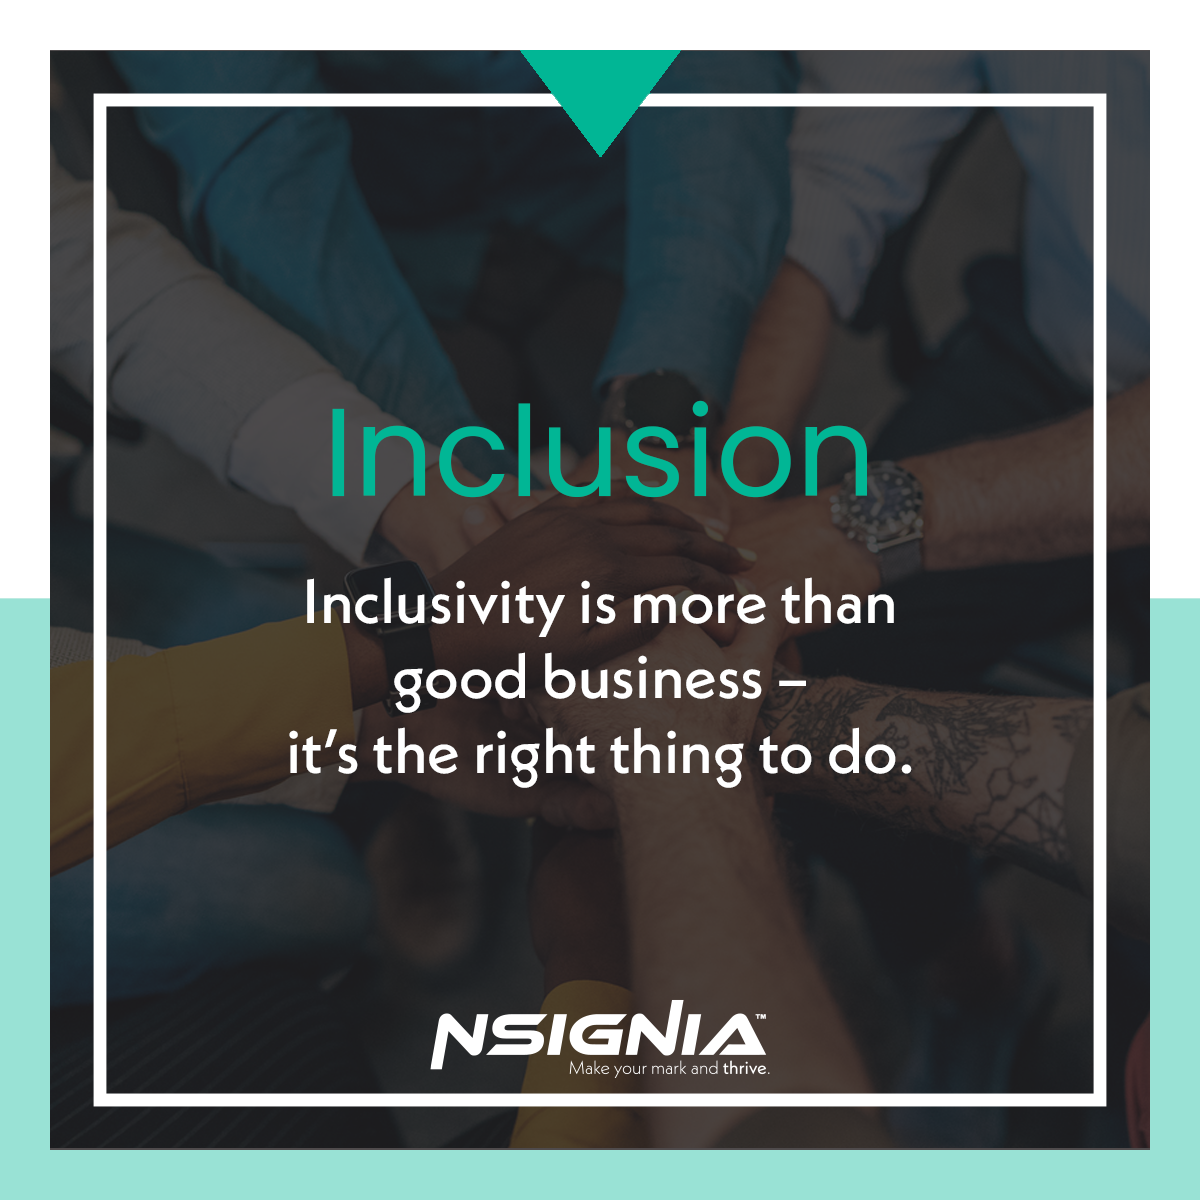 Inclusion - Inclusivity is more than good business - it's the right thing to do.